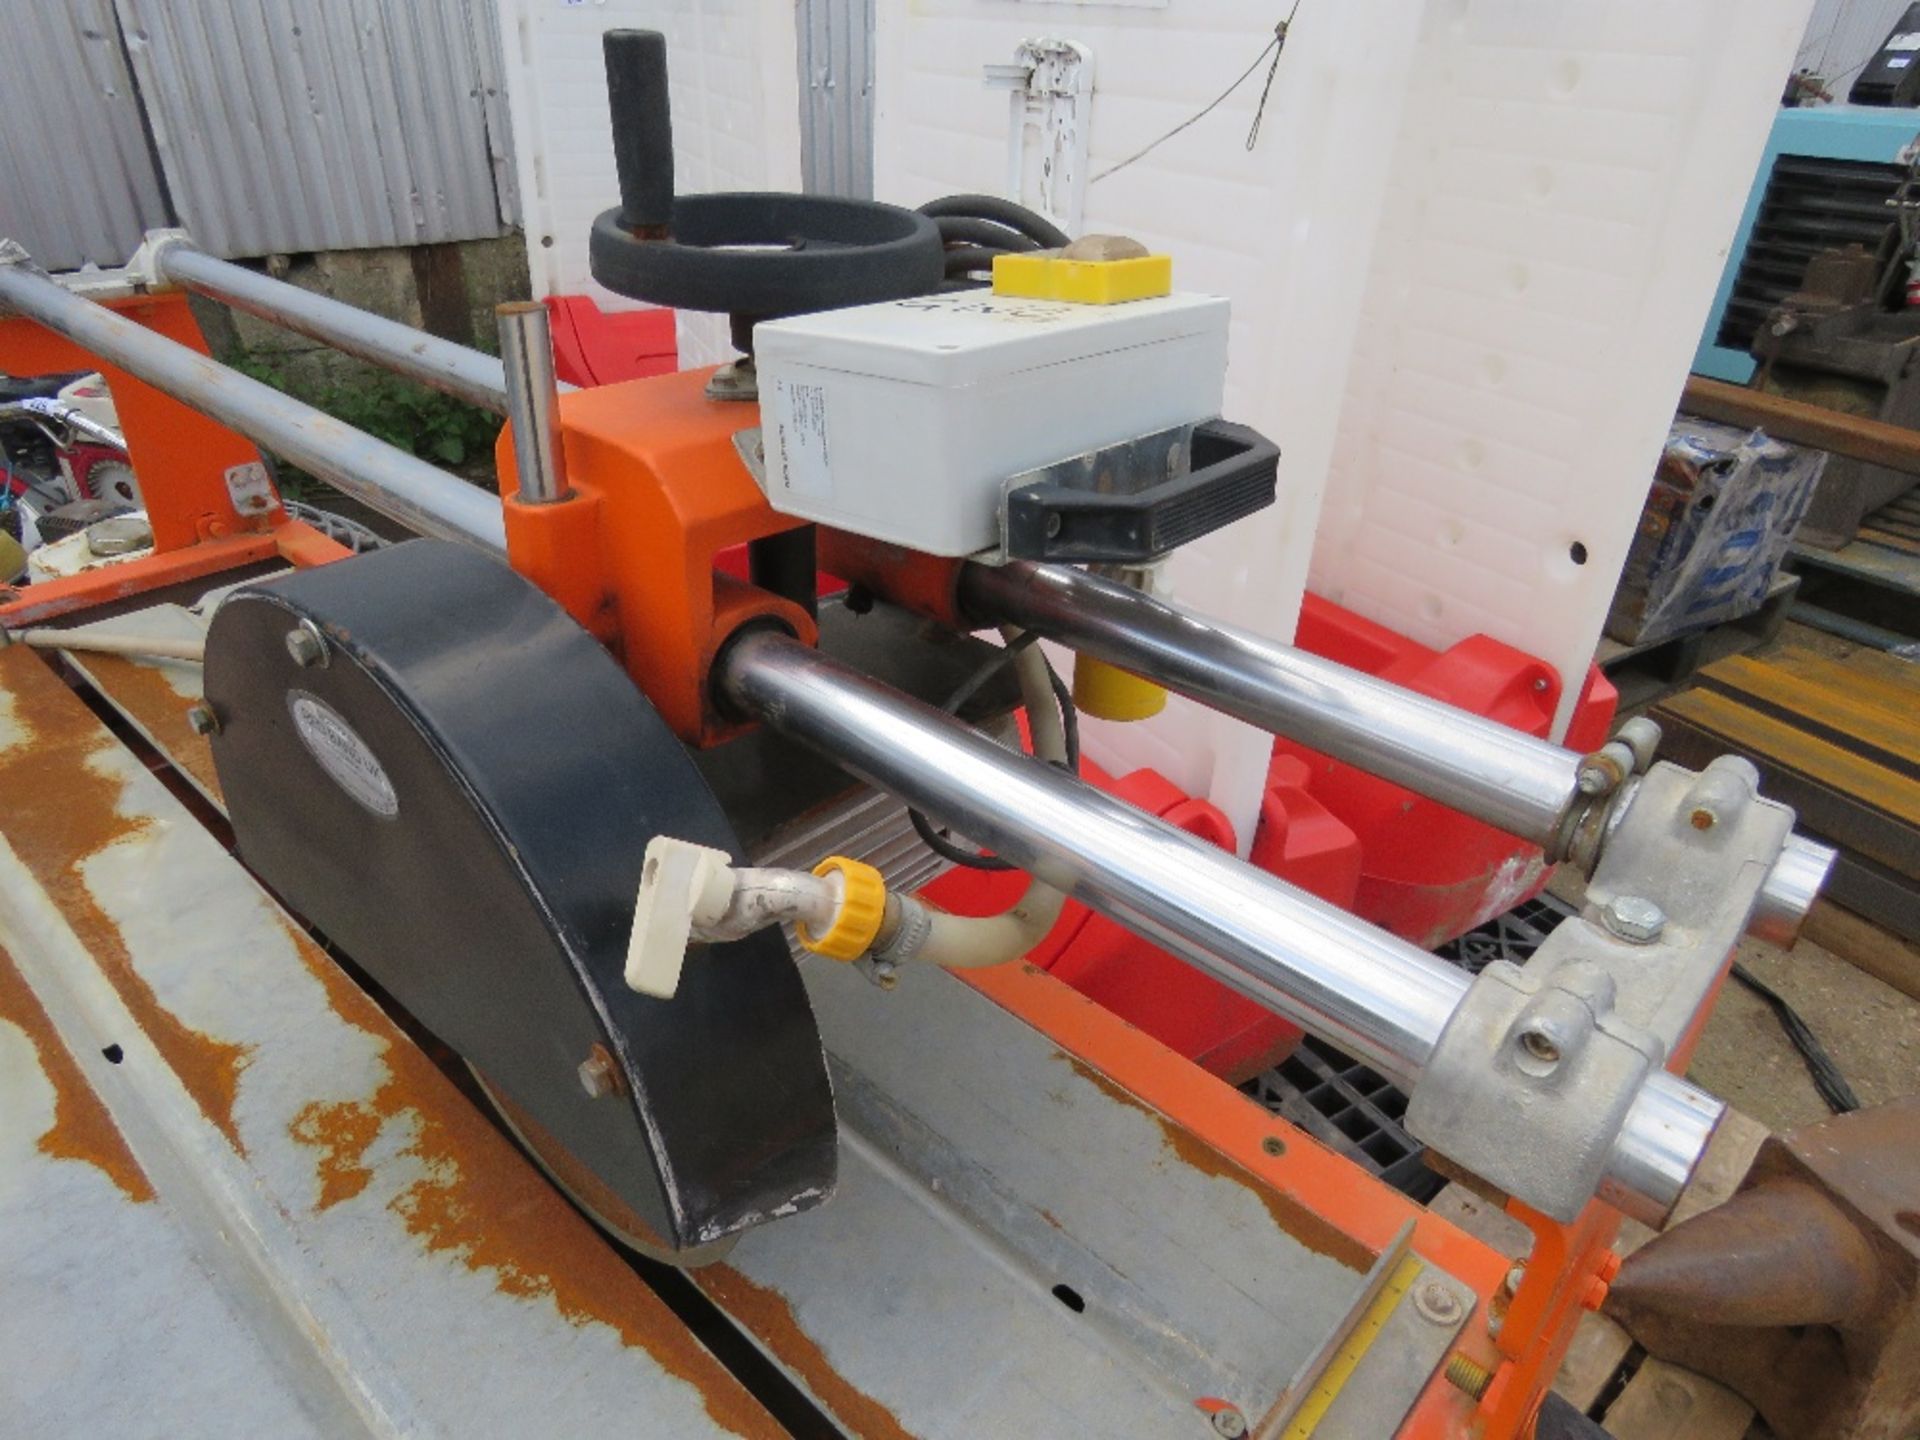 REDBAND SEGA MB120 MONO TILE SAW WITH SLIDING HEAD. RECENTLY WORKING, SURPLUS TO REQUIREMENTS. - Image 2 of 5